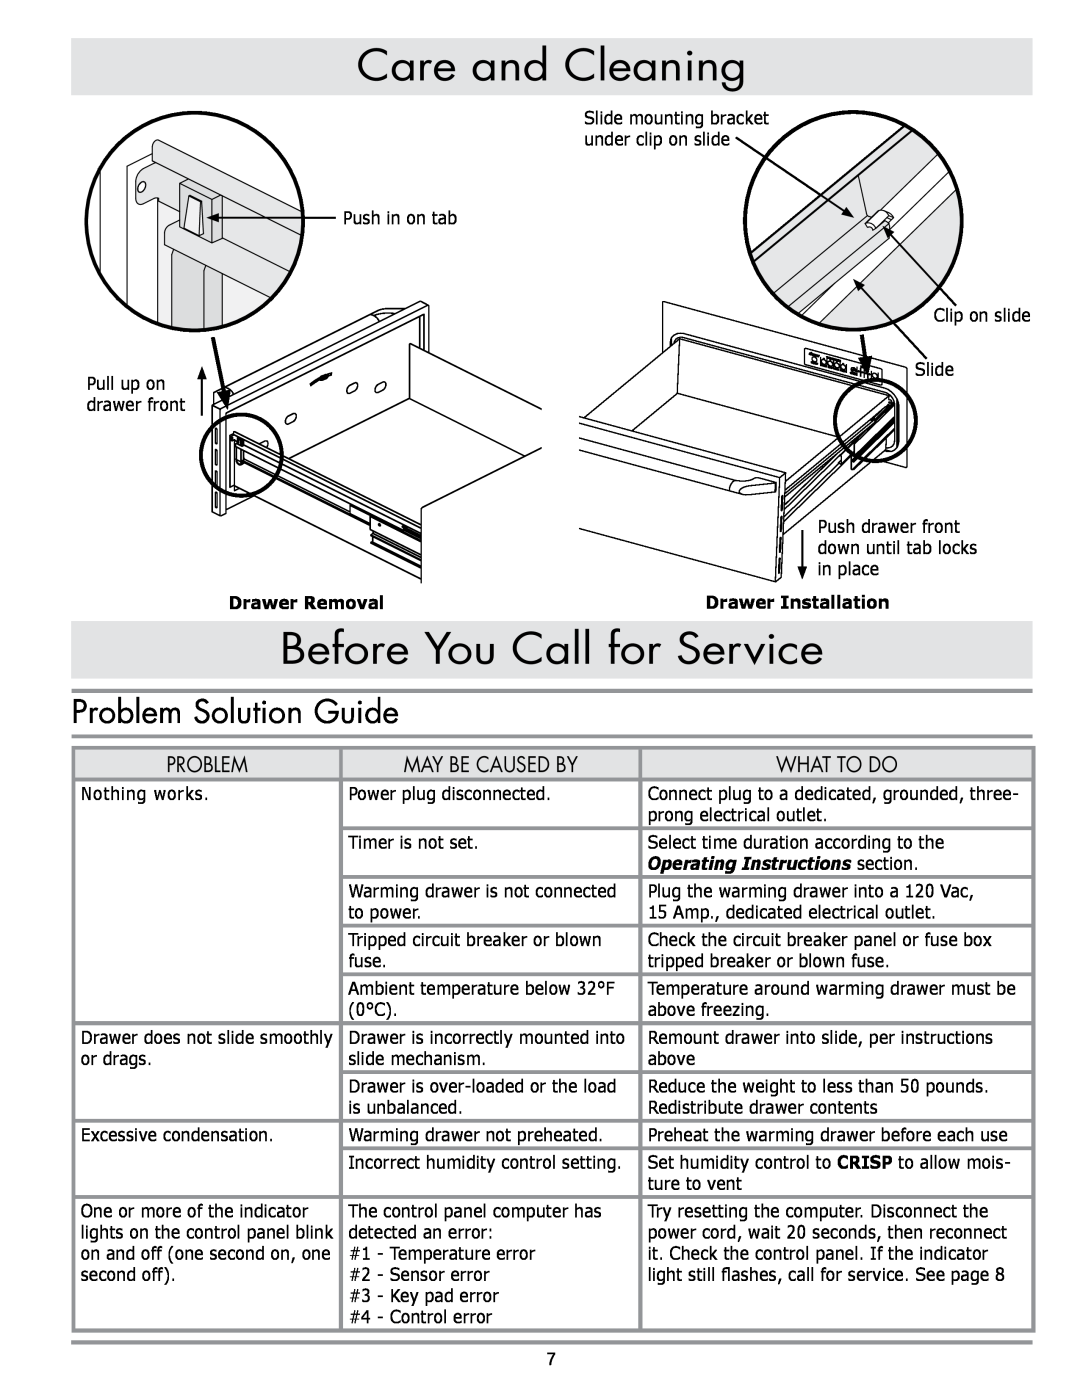 Dacor ERWD30 manual Before You Call for Service, Care and Cleaning, problem, may be caused by, what to DO, Drawer Removal 